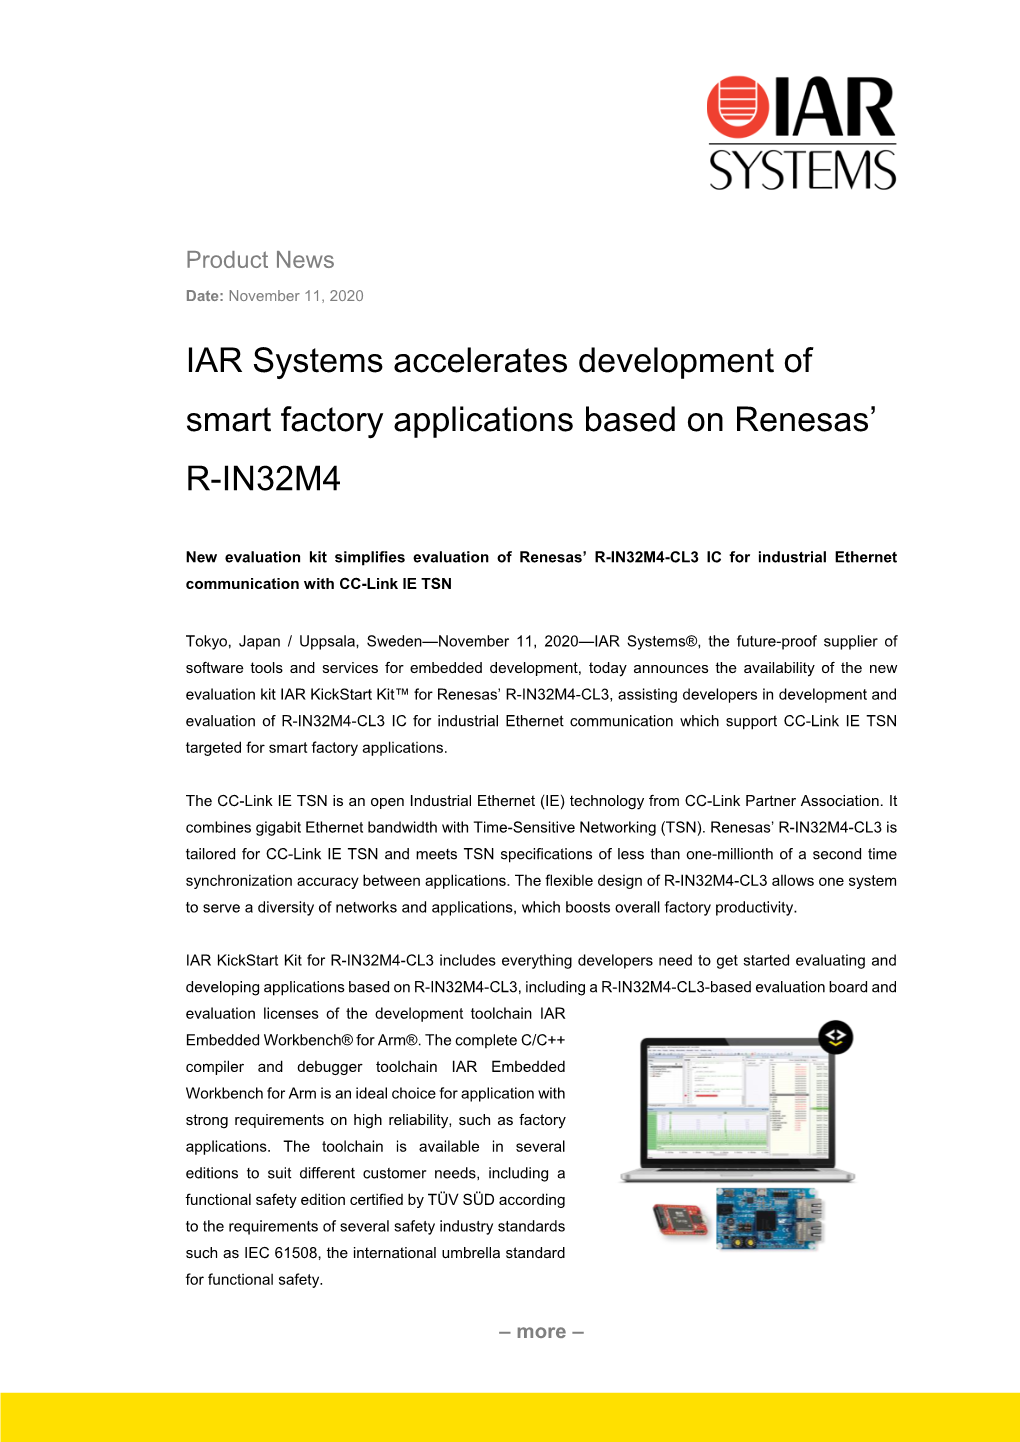 IAR Systems Accelerates Development of Smart Factory Applications Based on Renesas’ R-IN32M4